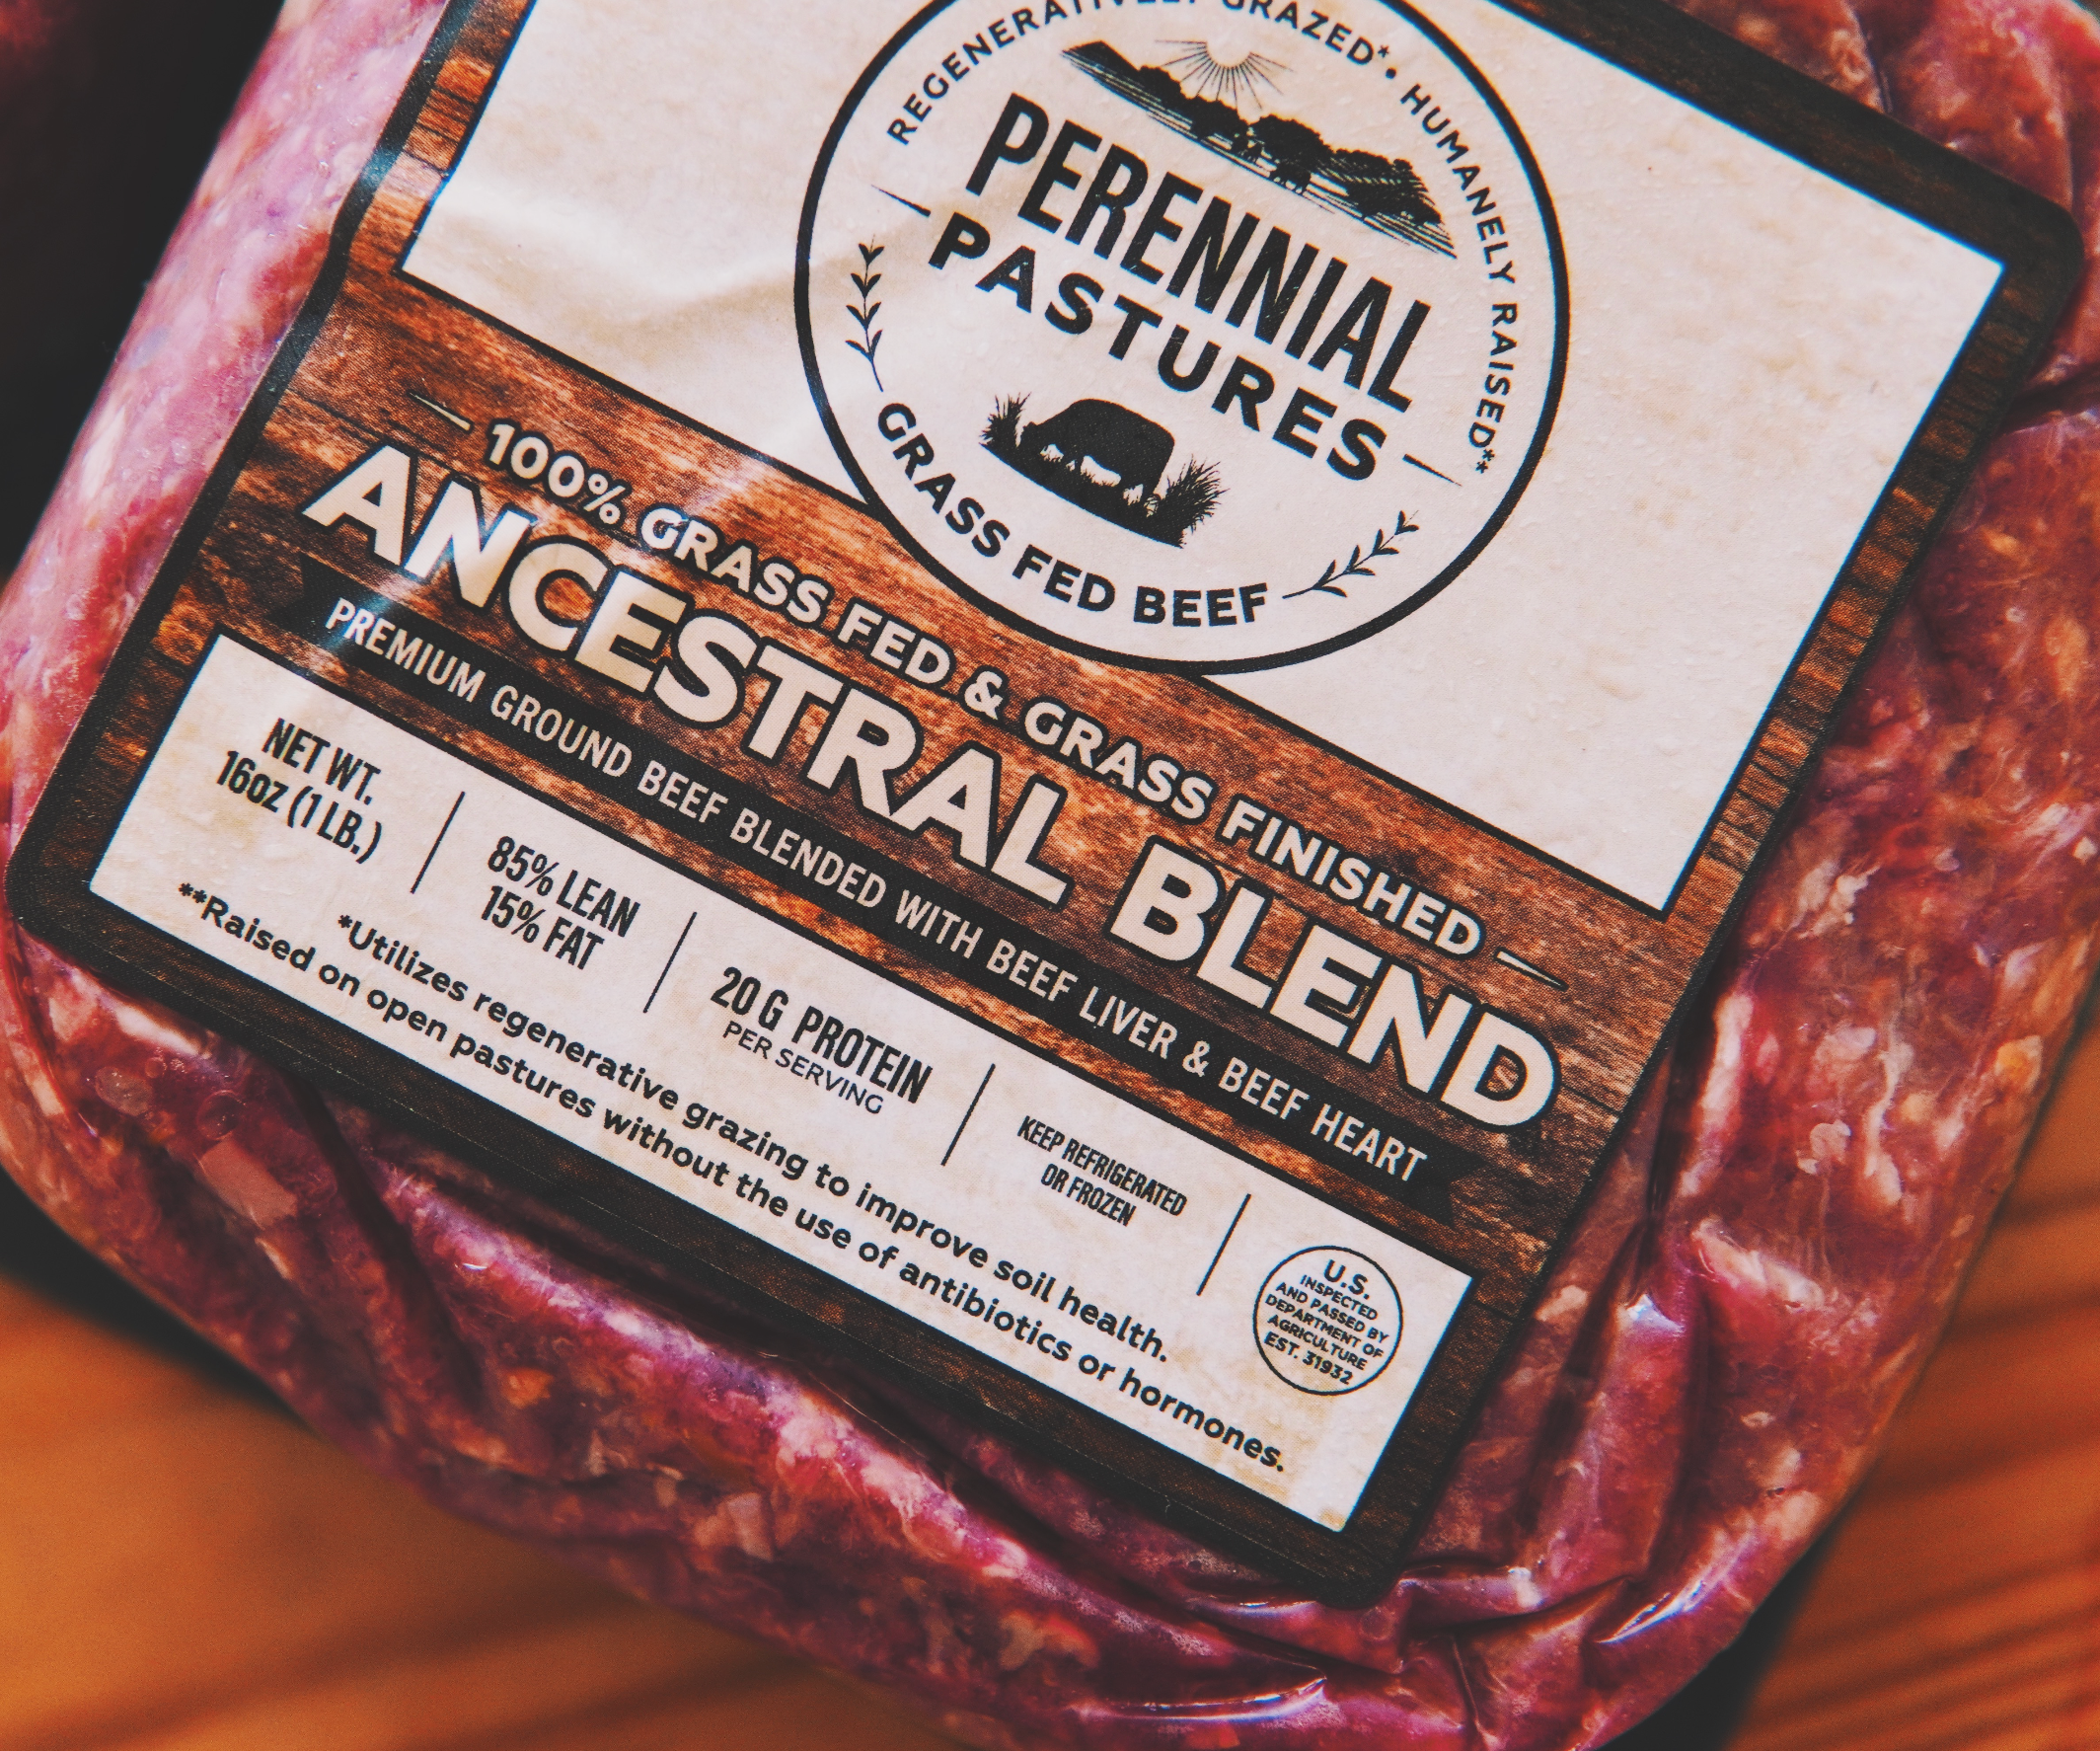 Ancestral Ground Beef Subscription Box $150 / month (subscribe & save | $15/lb)